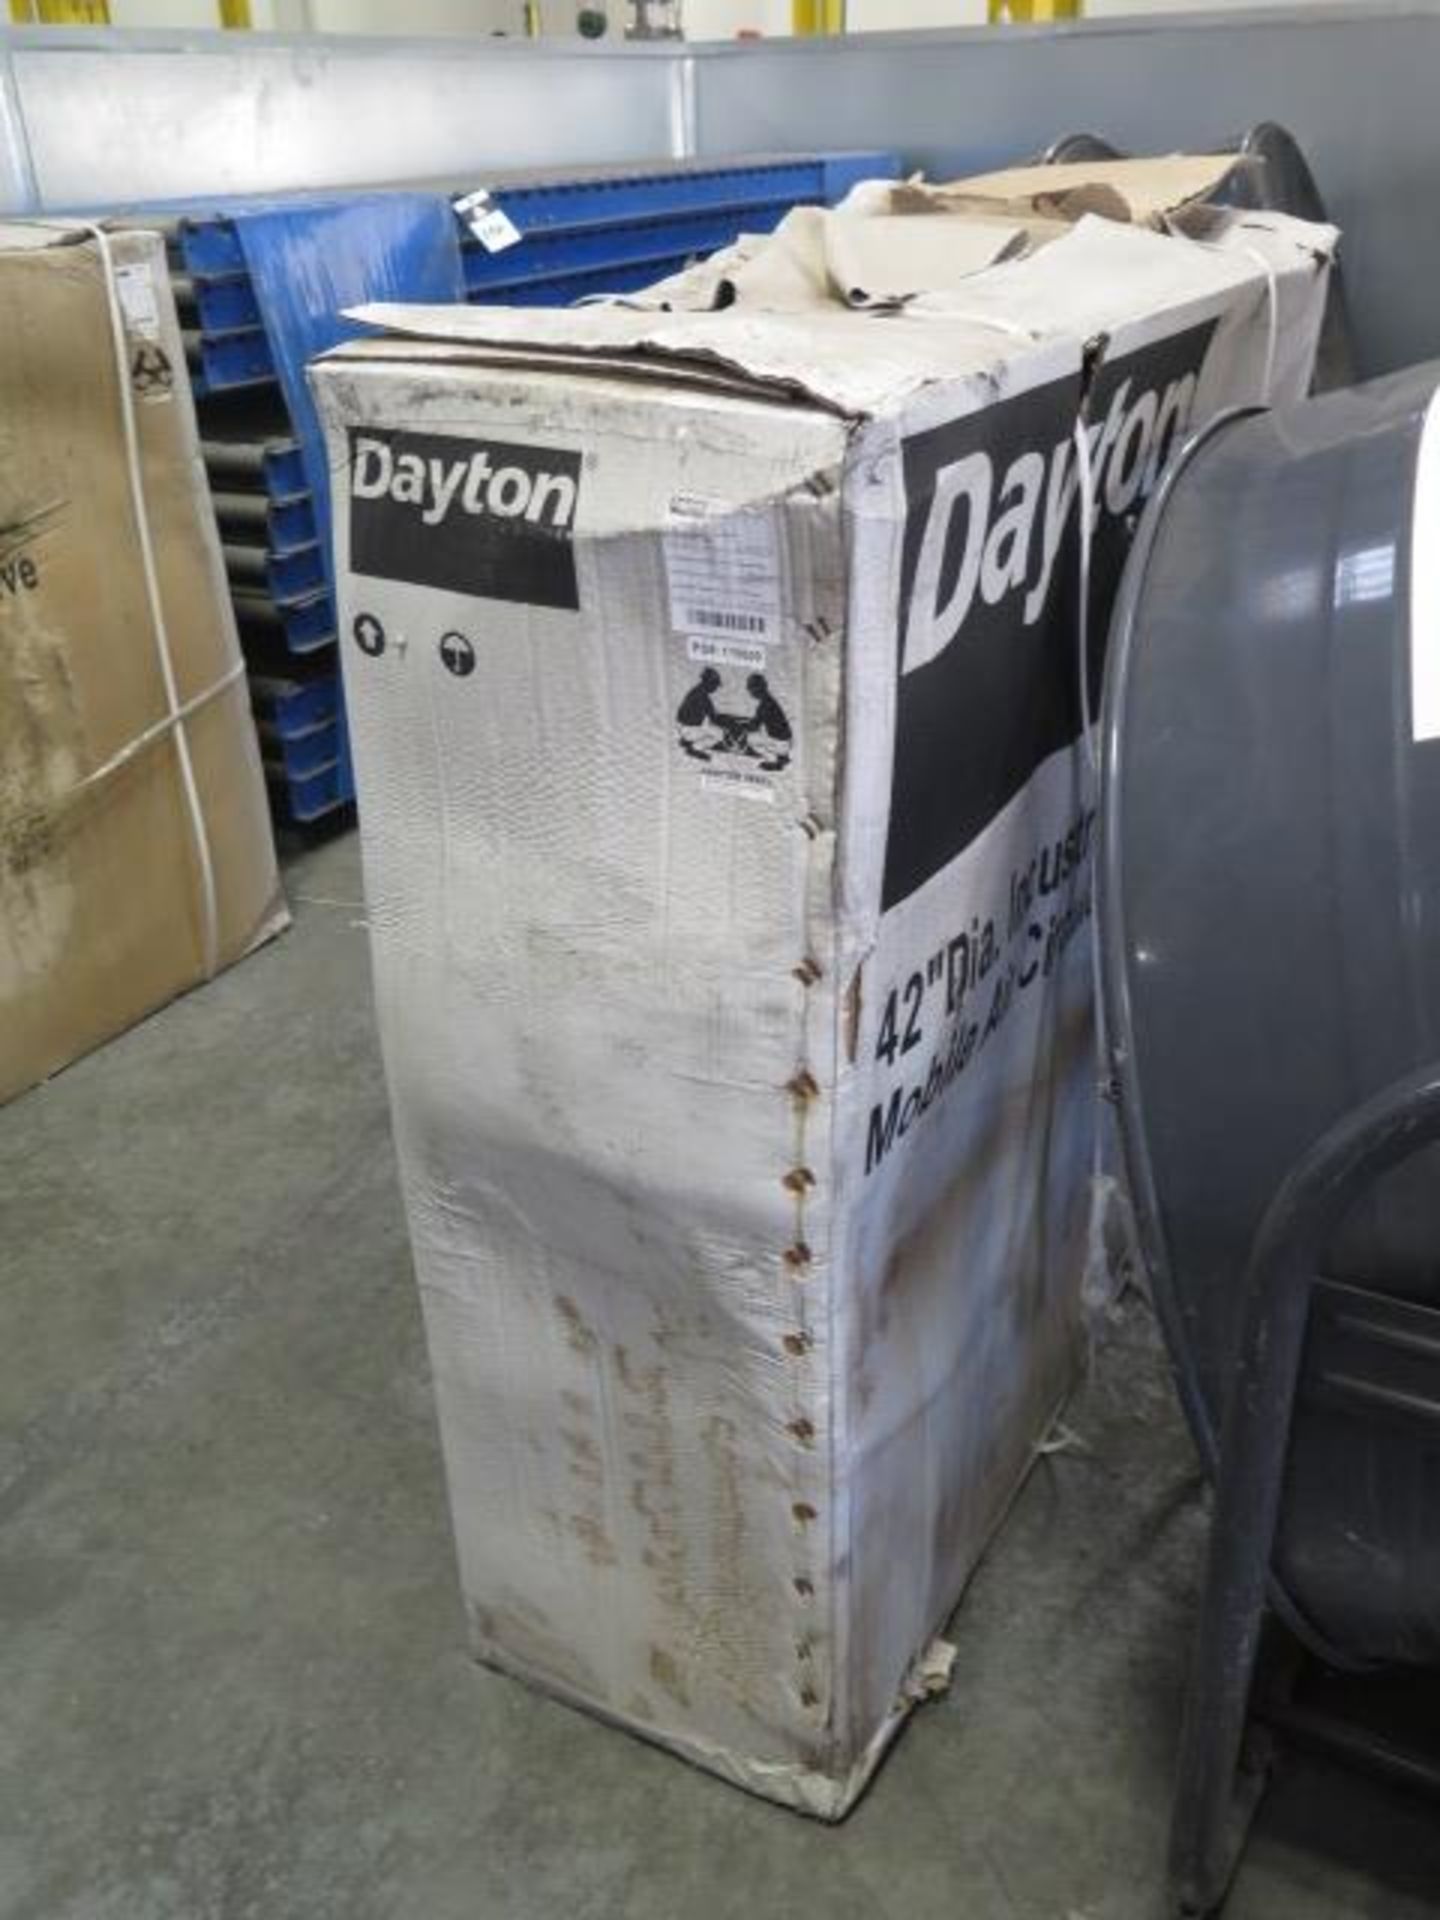 Dayton 42" Shop Fans (2) (1-NEW and 1-Used) (SOLD AS-IS - NO WARRANTY) - Image 4 of 6